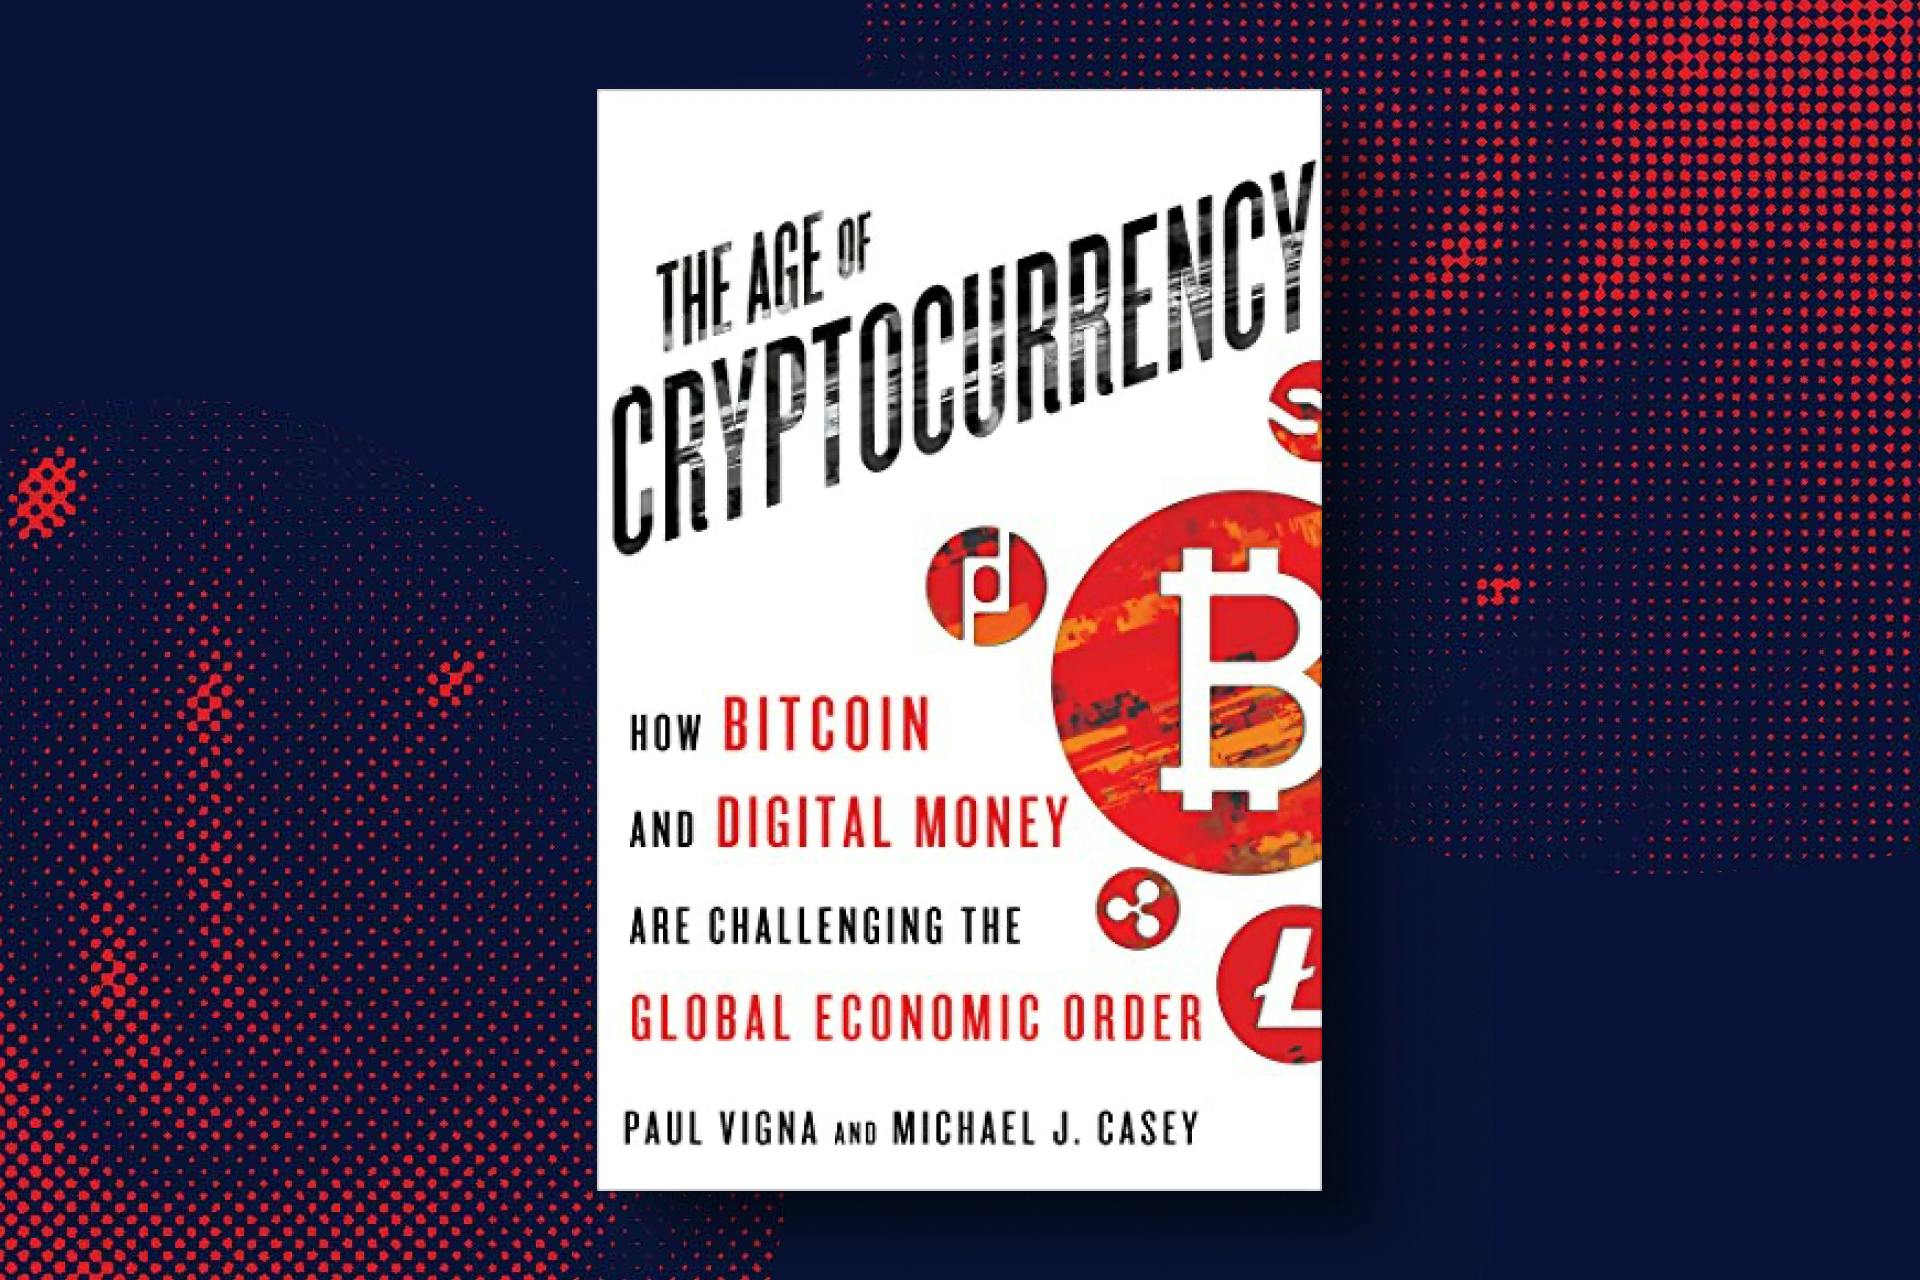 cryptocurrency 101 book